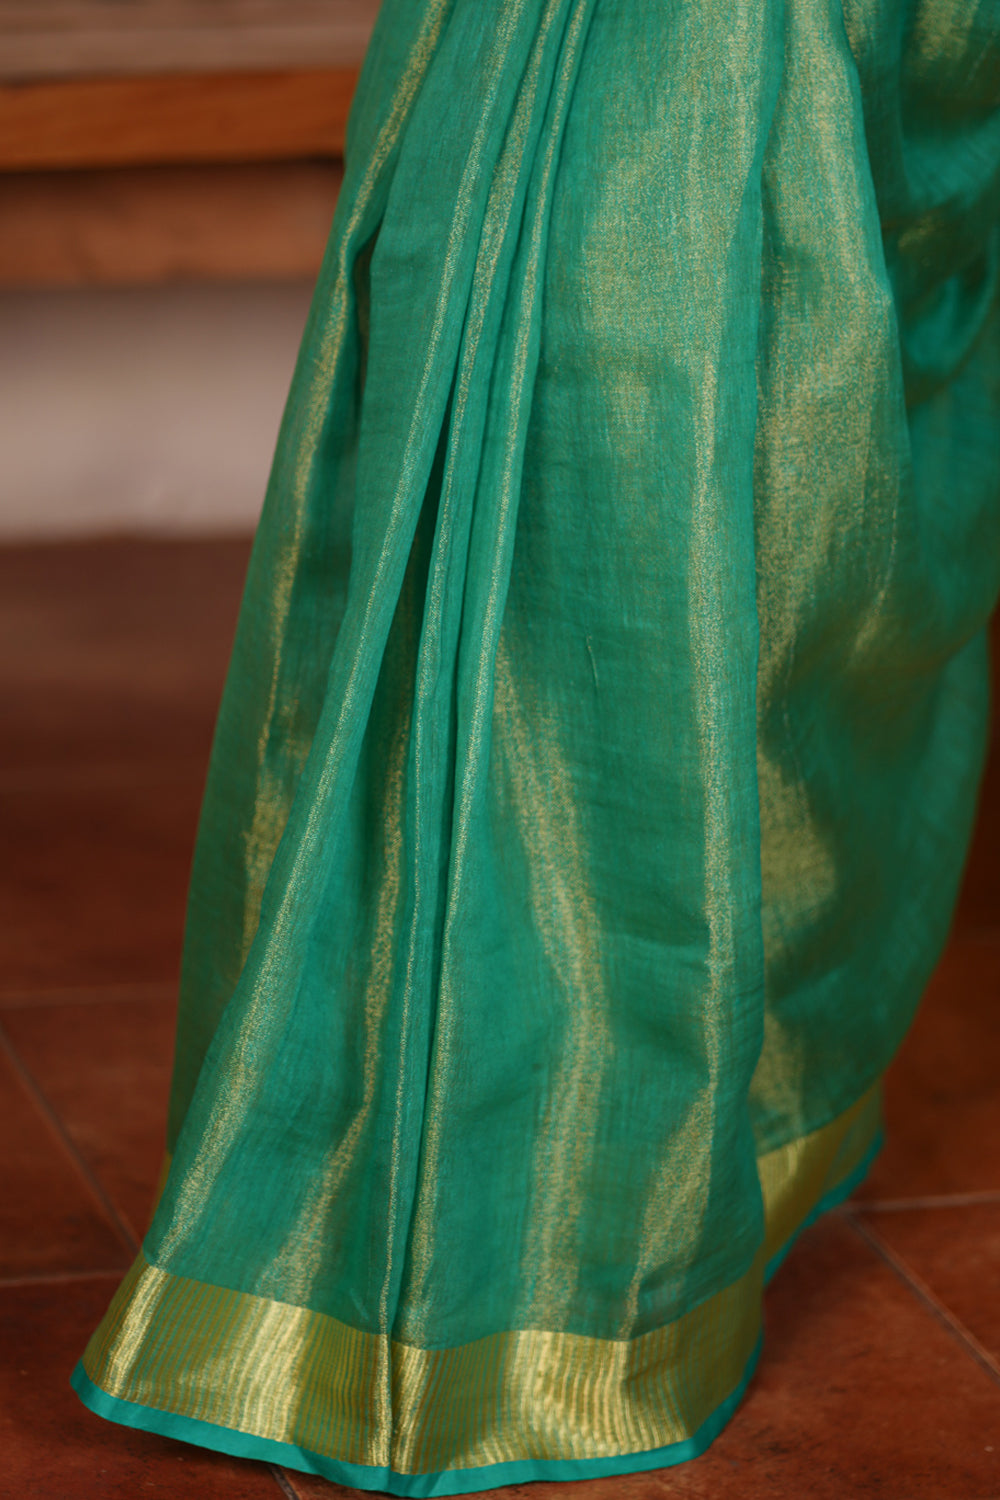 Rama Green and Gold Tissue by Linen Saree